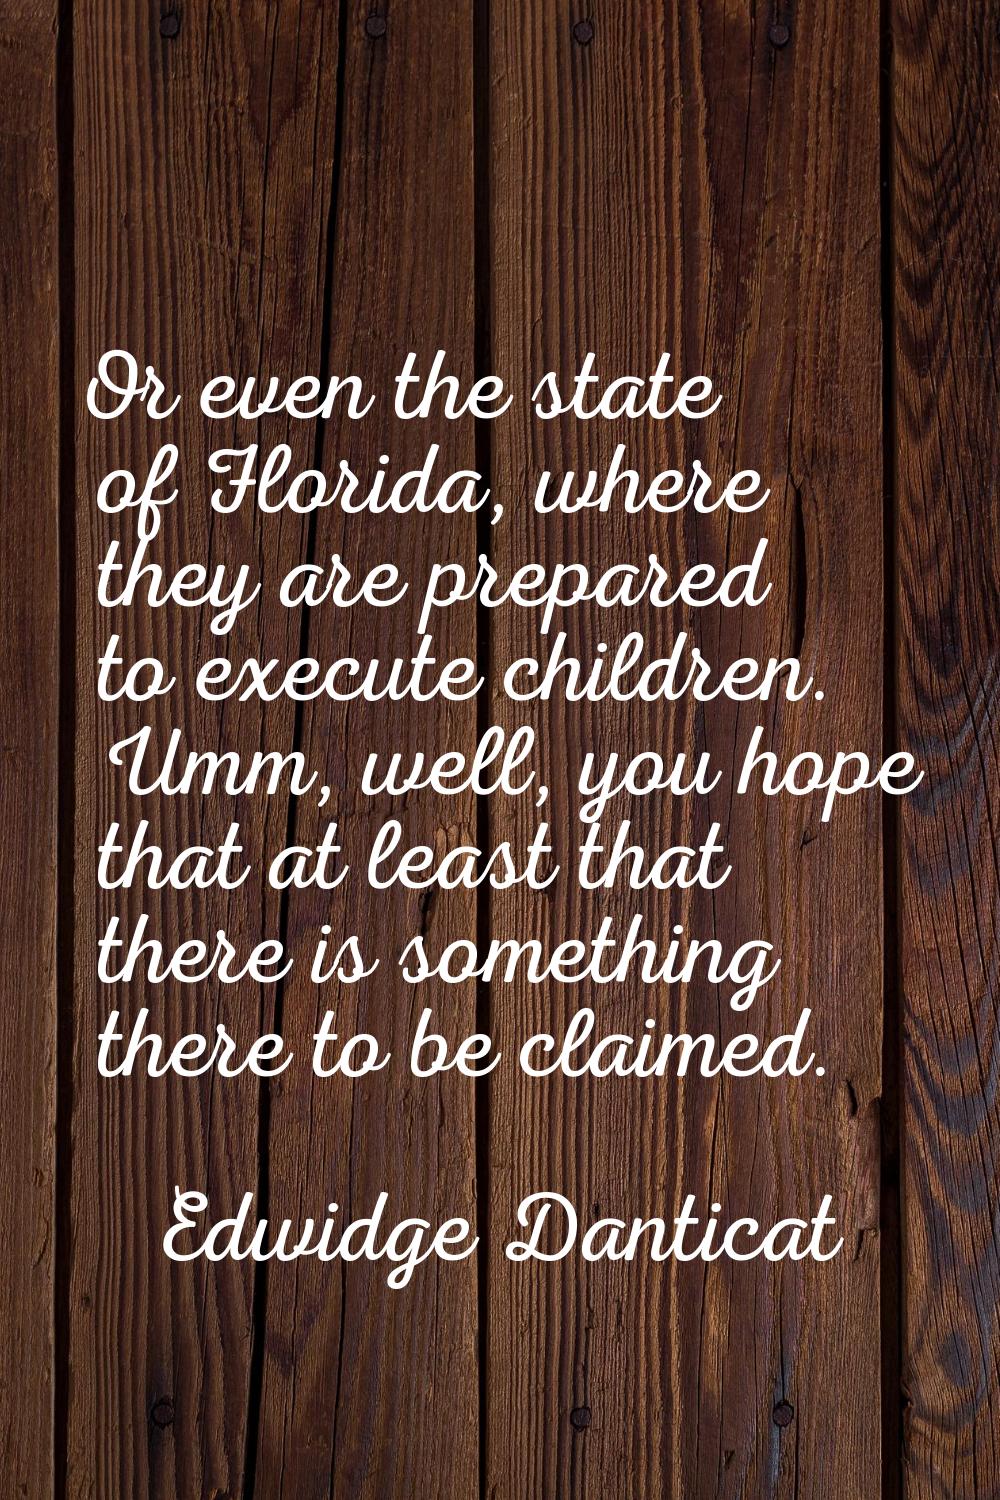 Or even the state of Florida, where they are prepared to execute children. Umm, well, you hope that